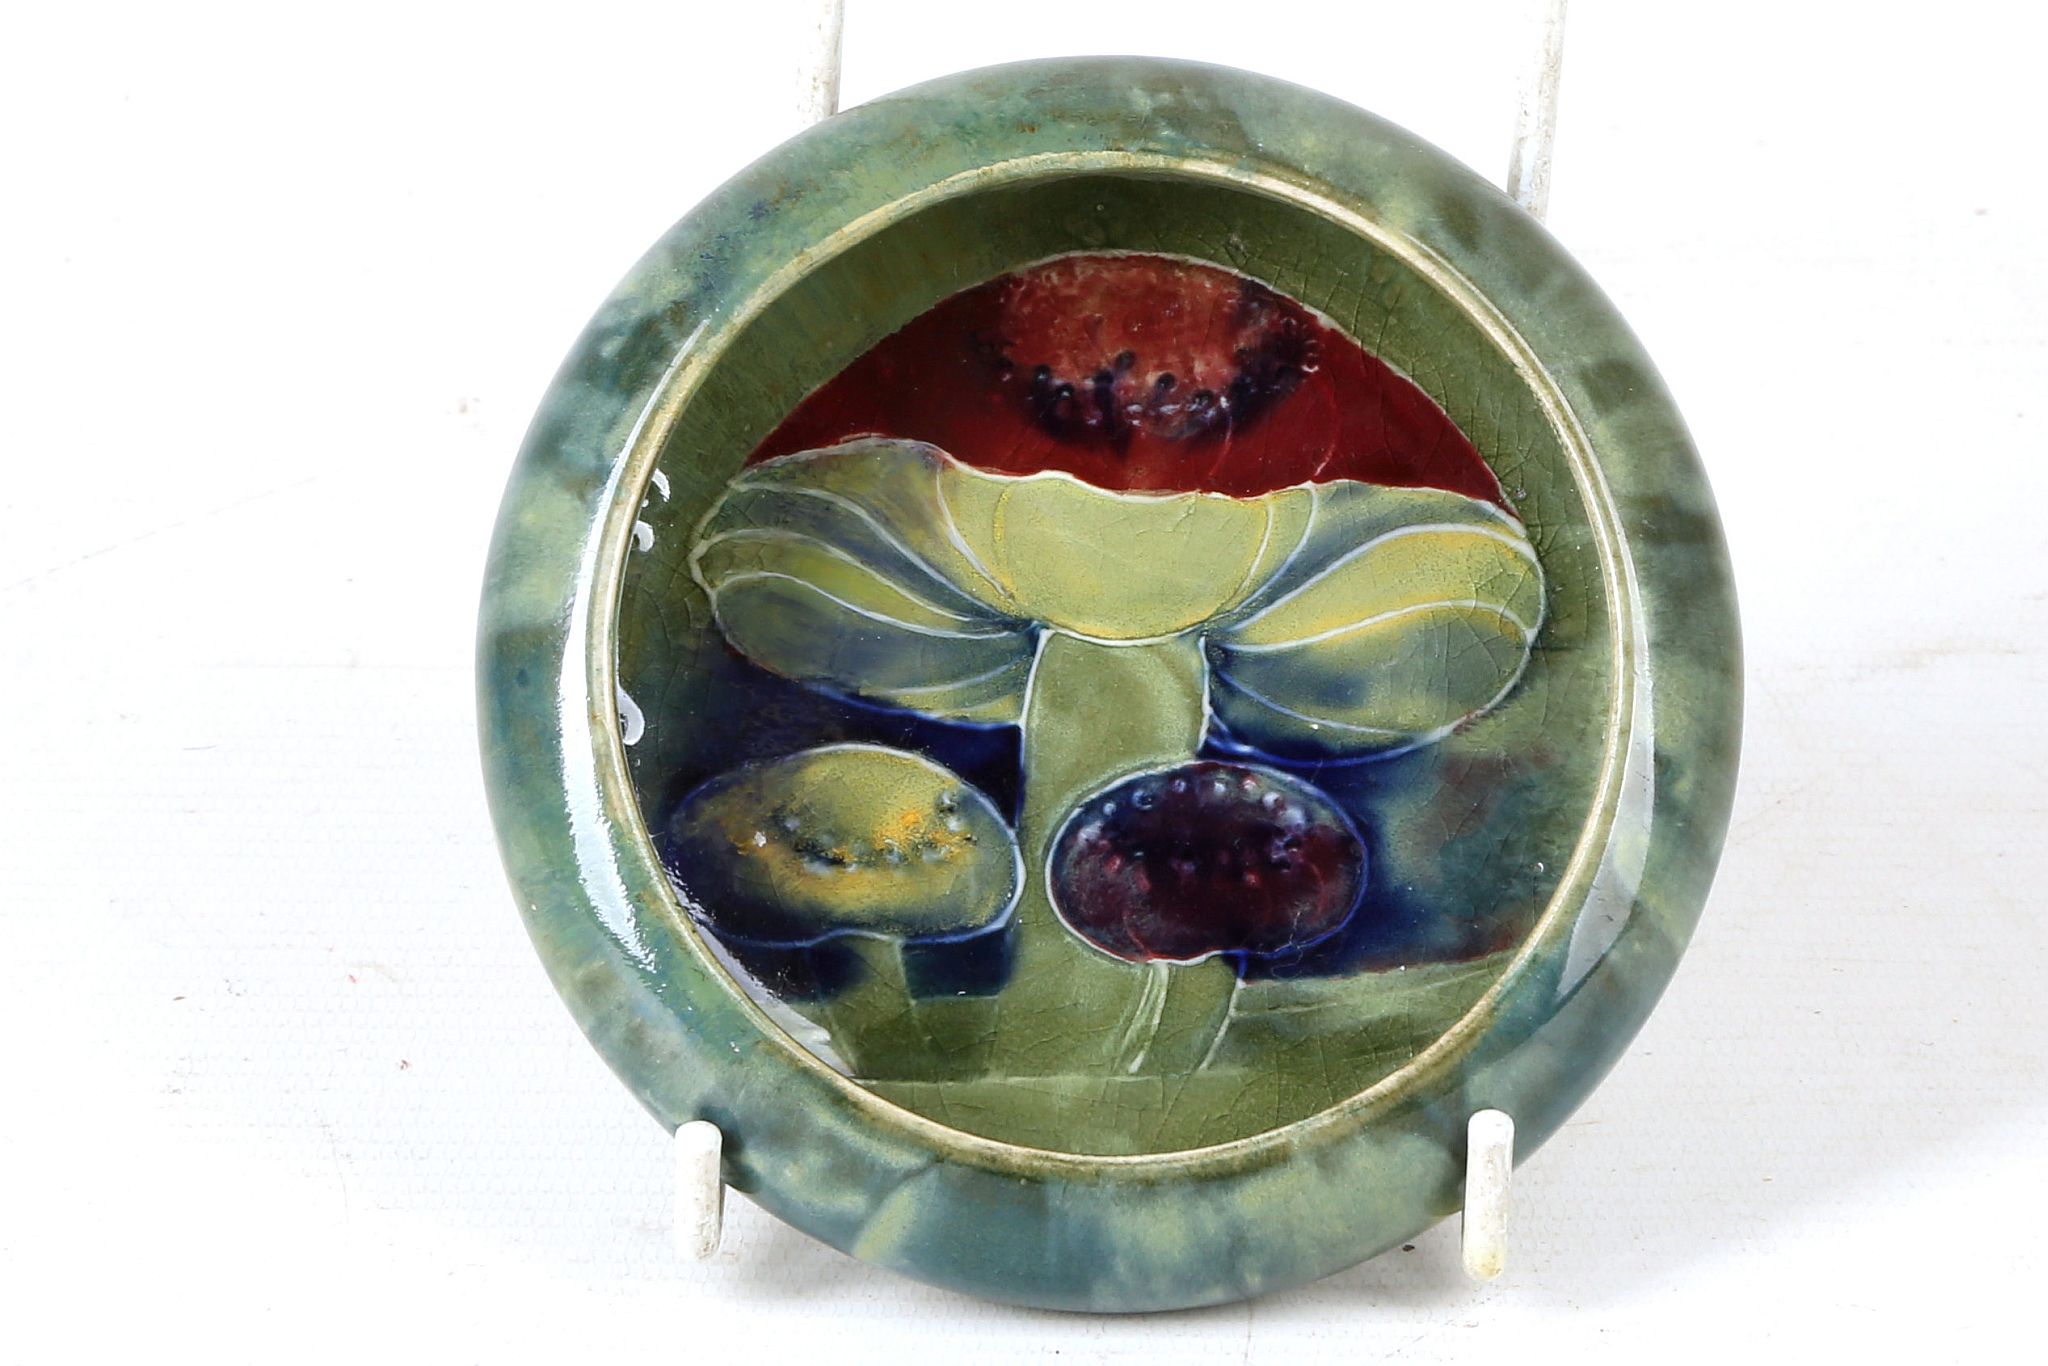 AN EARLY 20TH CENTURY WILLIAM MOORCROFT POTTERY INVERTED RIM CIRCULAR DISH, dated Oct. 1913, green